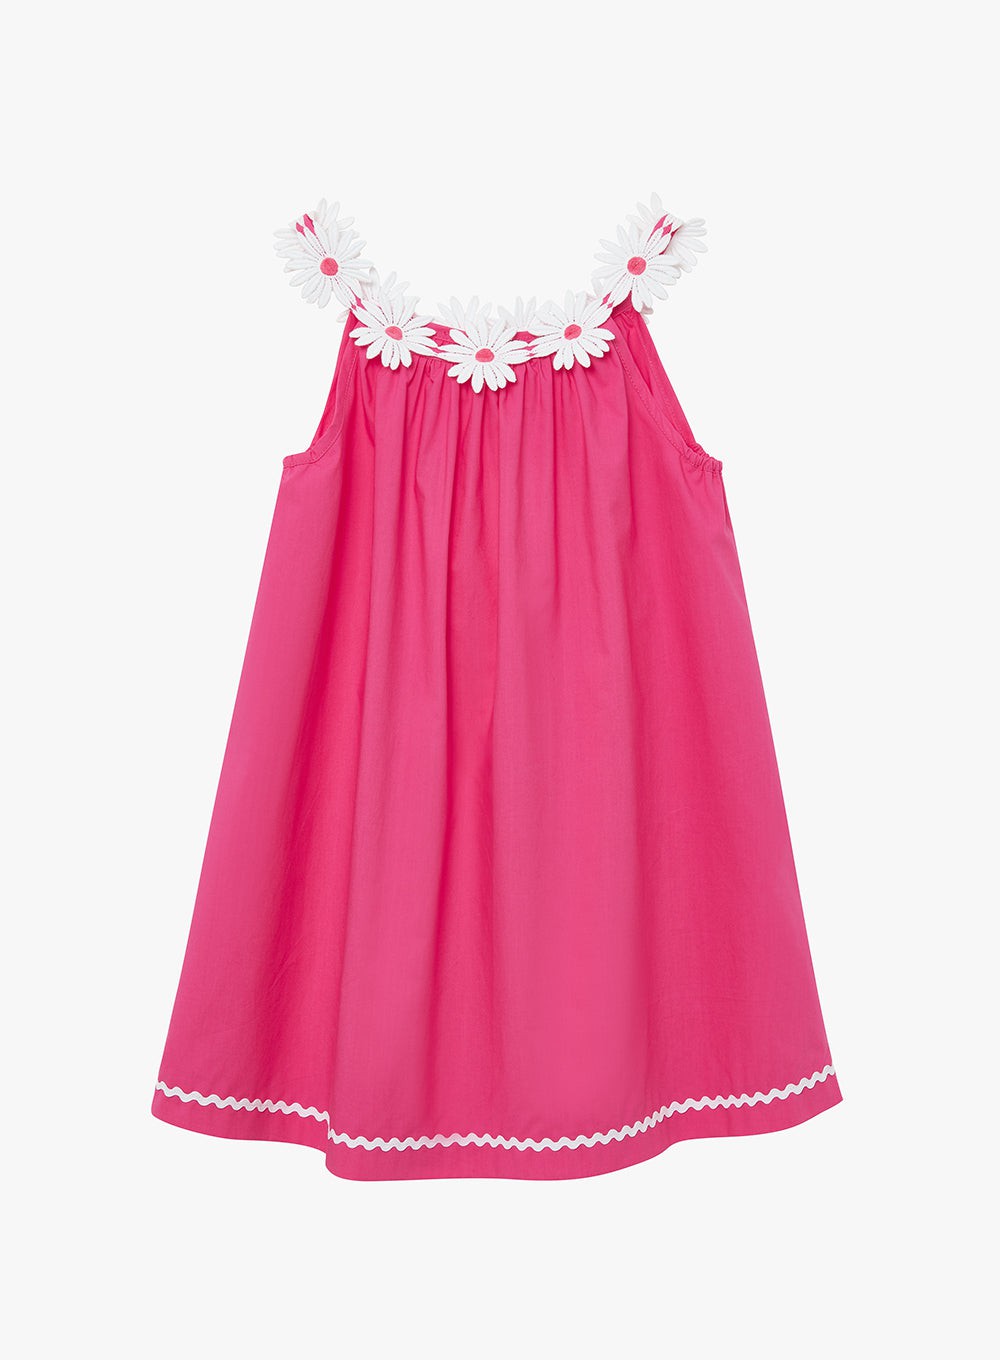 Confiture Dress Broderie Daisy Dress in Bright Pink